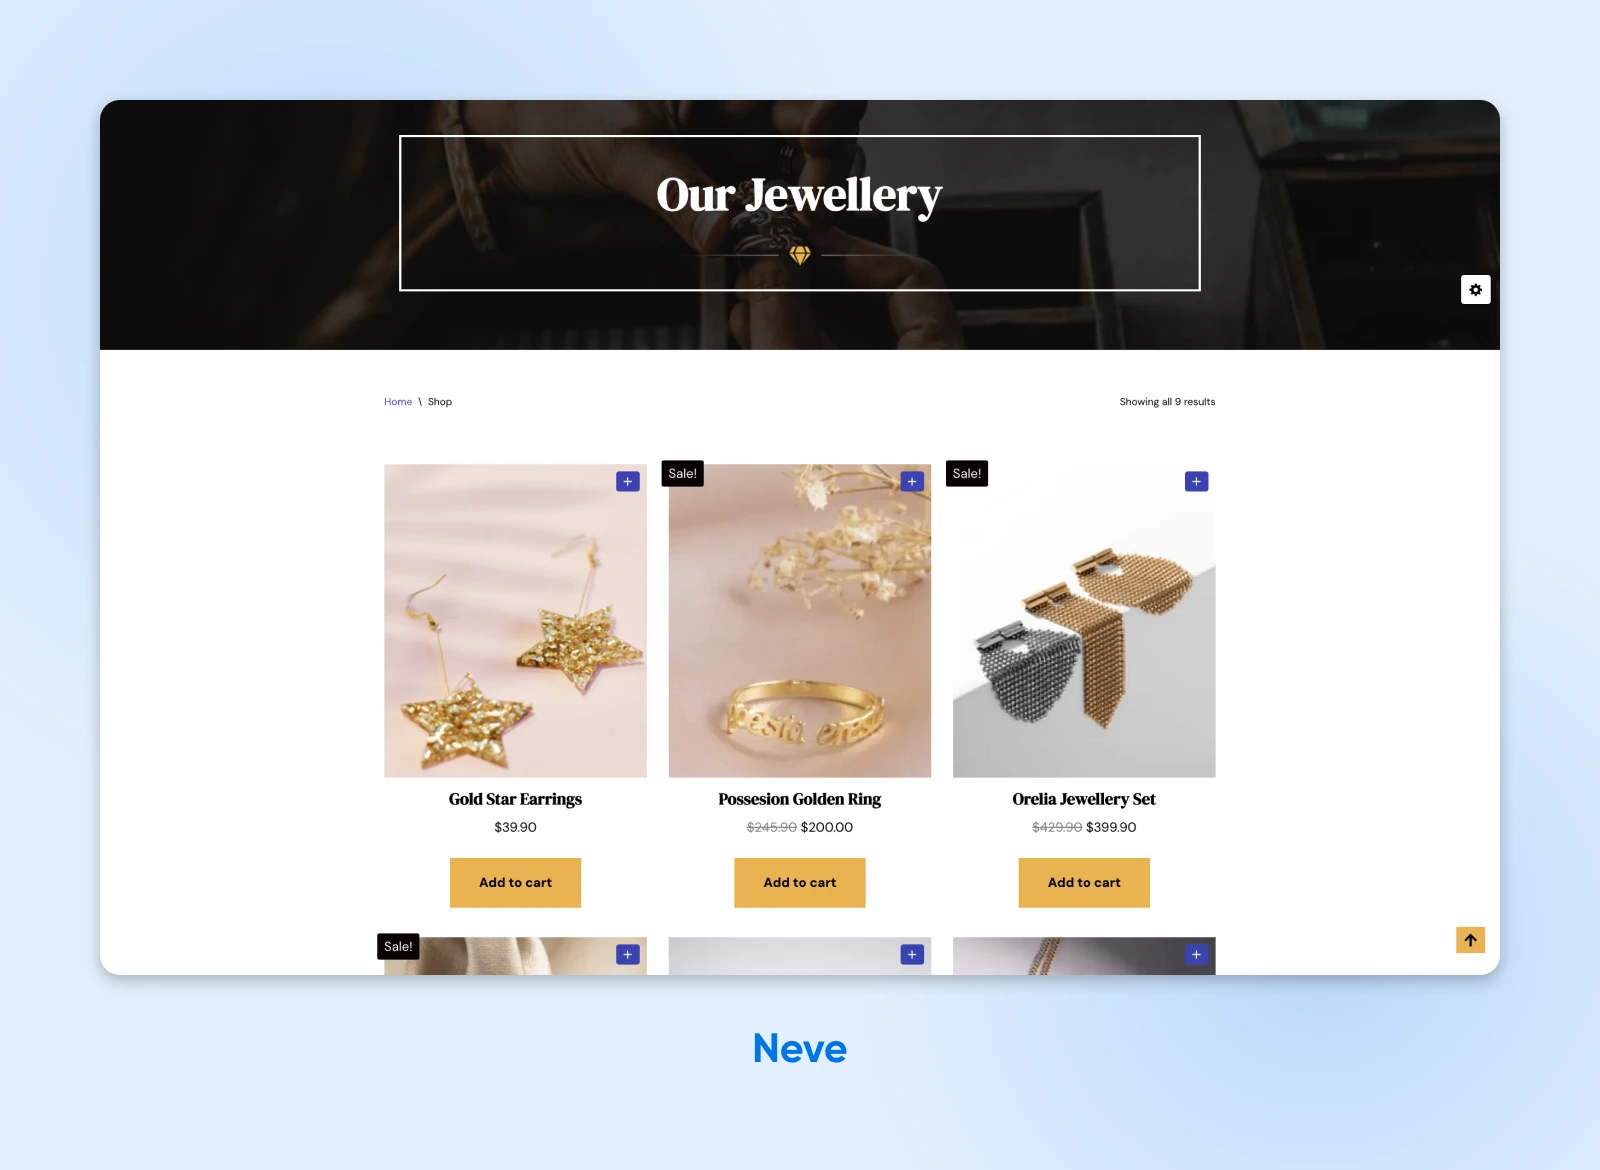 Neve WooCommerce theme showing a sample page with jewellery products and buttons to "Add to cart."